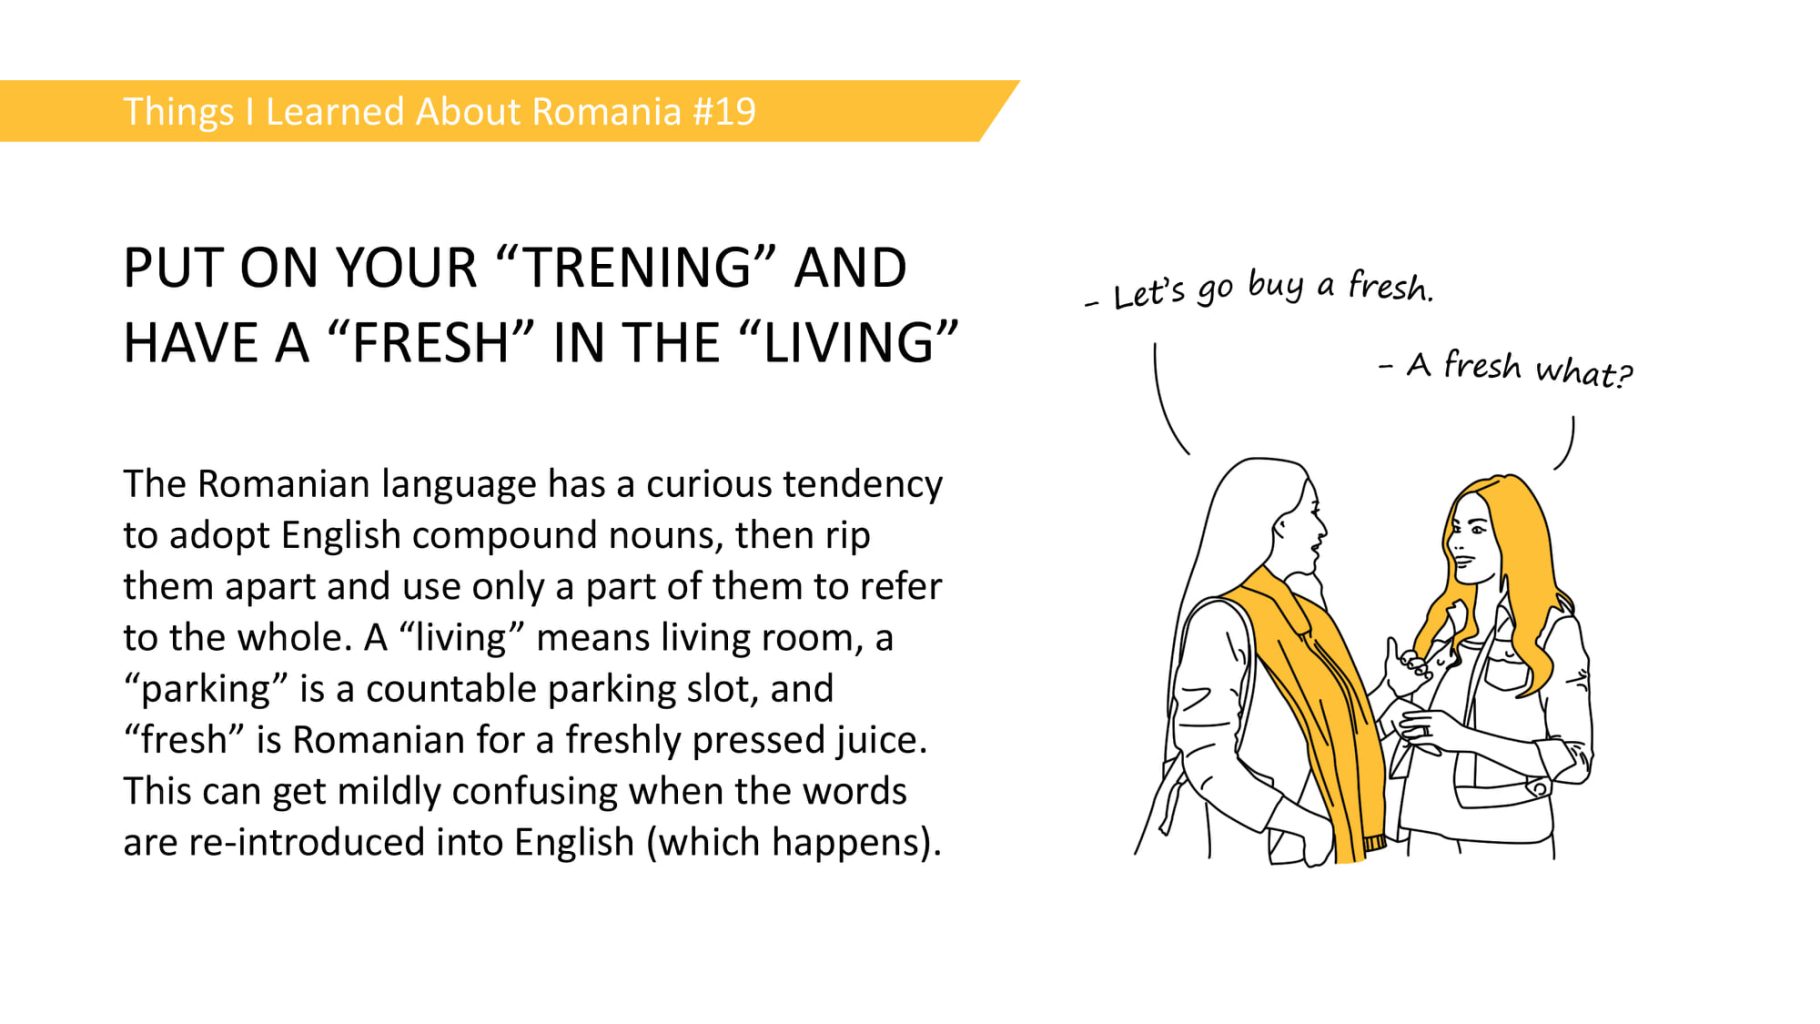 PUT ON YOUR "TRENING" AND HAVE A "FRESH" IN THE "LIVING" - The Romanian language has a curious tendency to adopt English compound nouns, then rip them apart and use only a part of them to refer to the whole. A "living" means living room, a "parking" is a countable parking slot, and "fresh" is Romanian for a freshly pressed juice. This can get mildly confusing when the words are re-introduced into English (which happens).